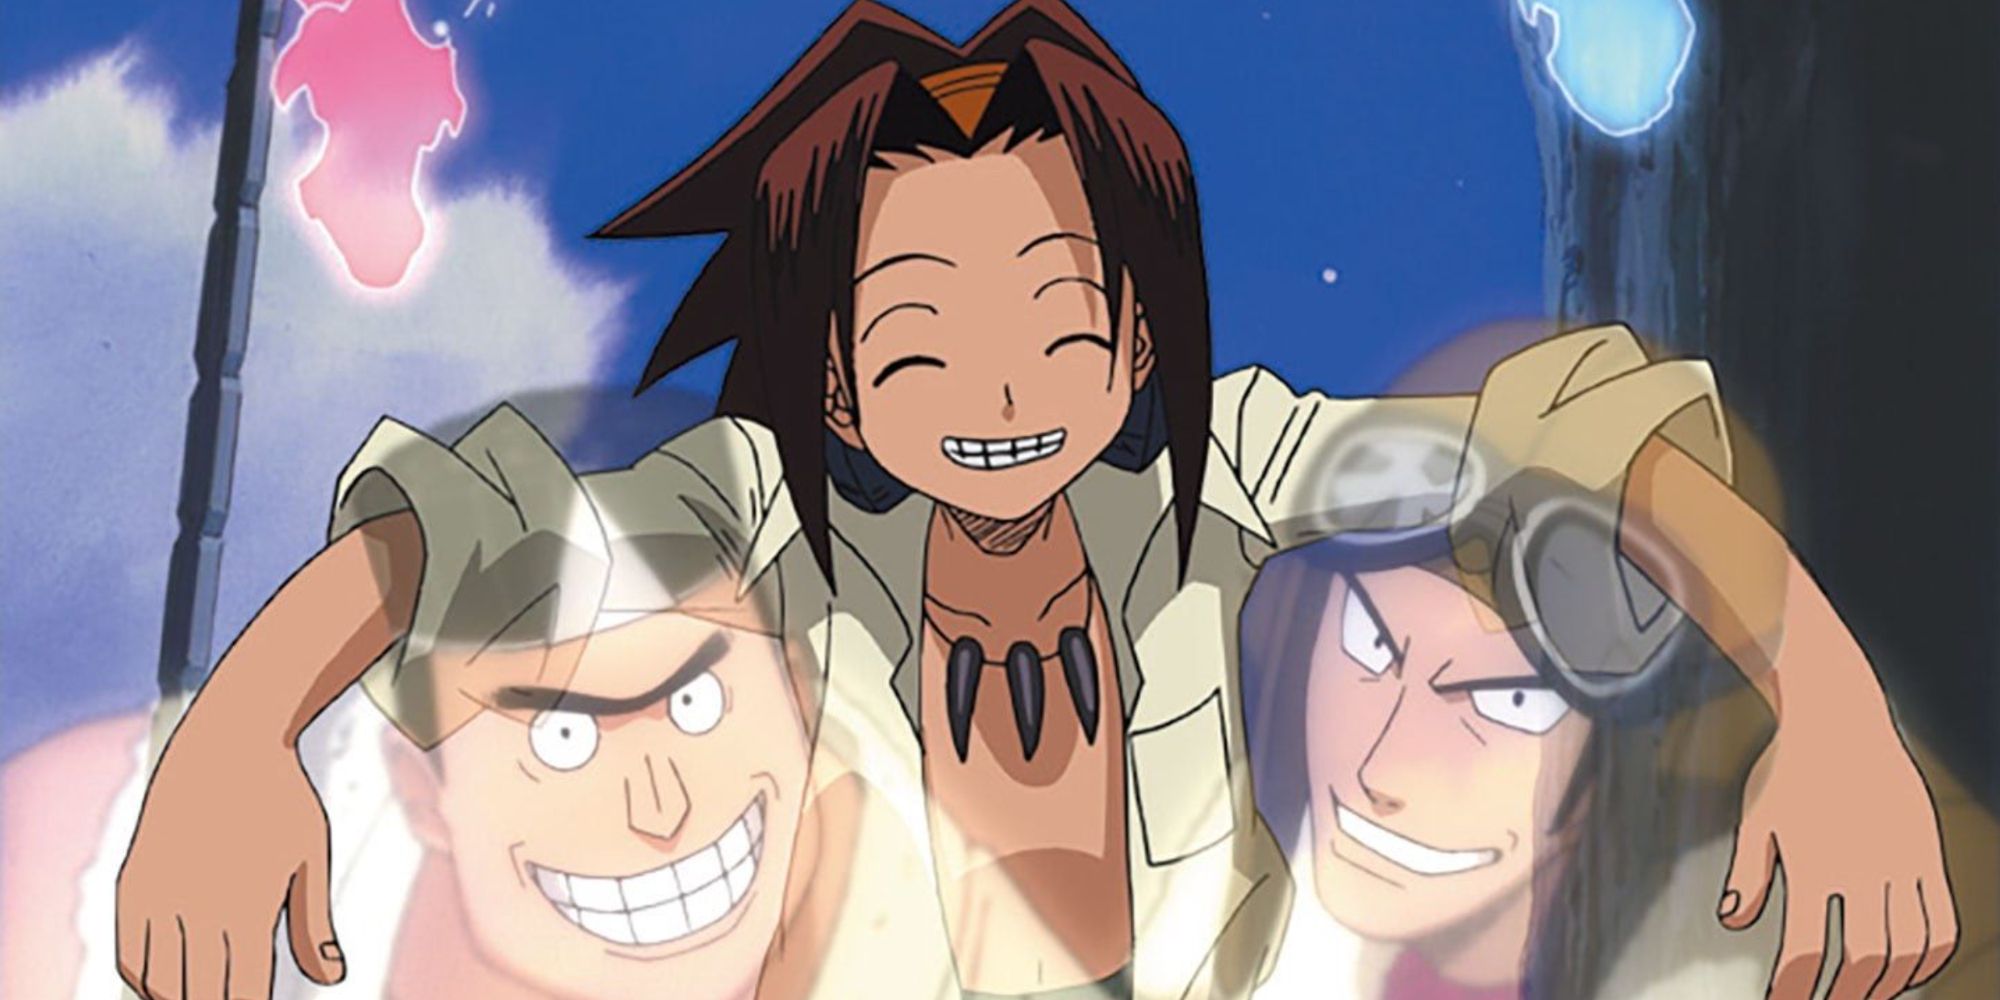 Characters from Shaman King